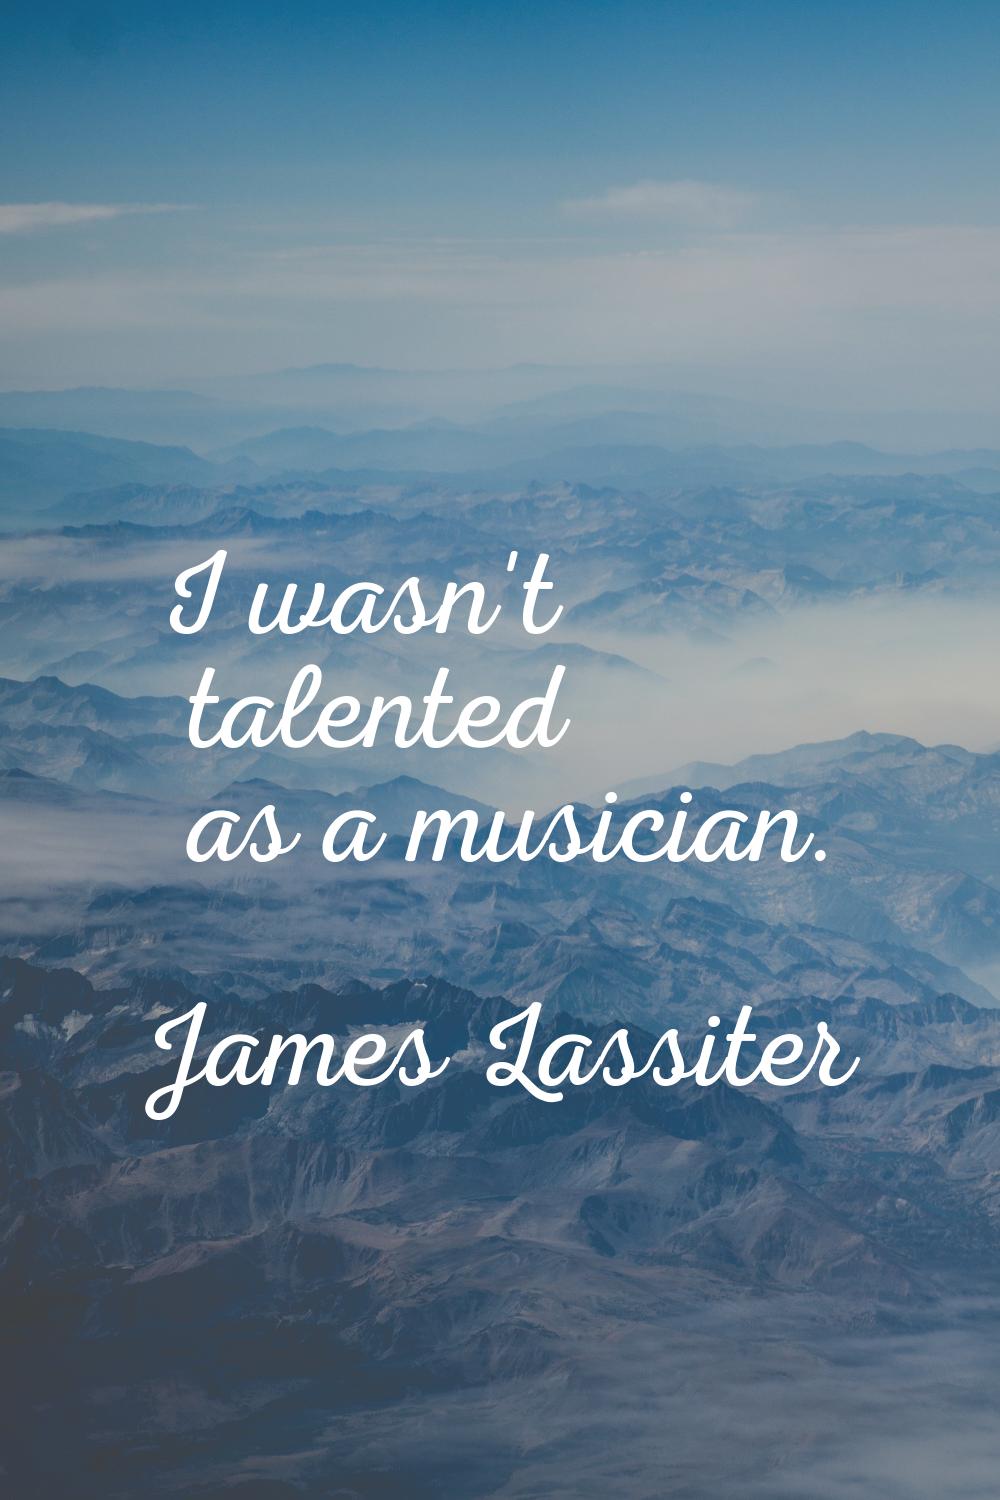 I wasn't talented as a musician.